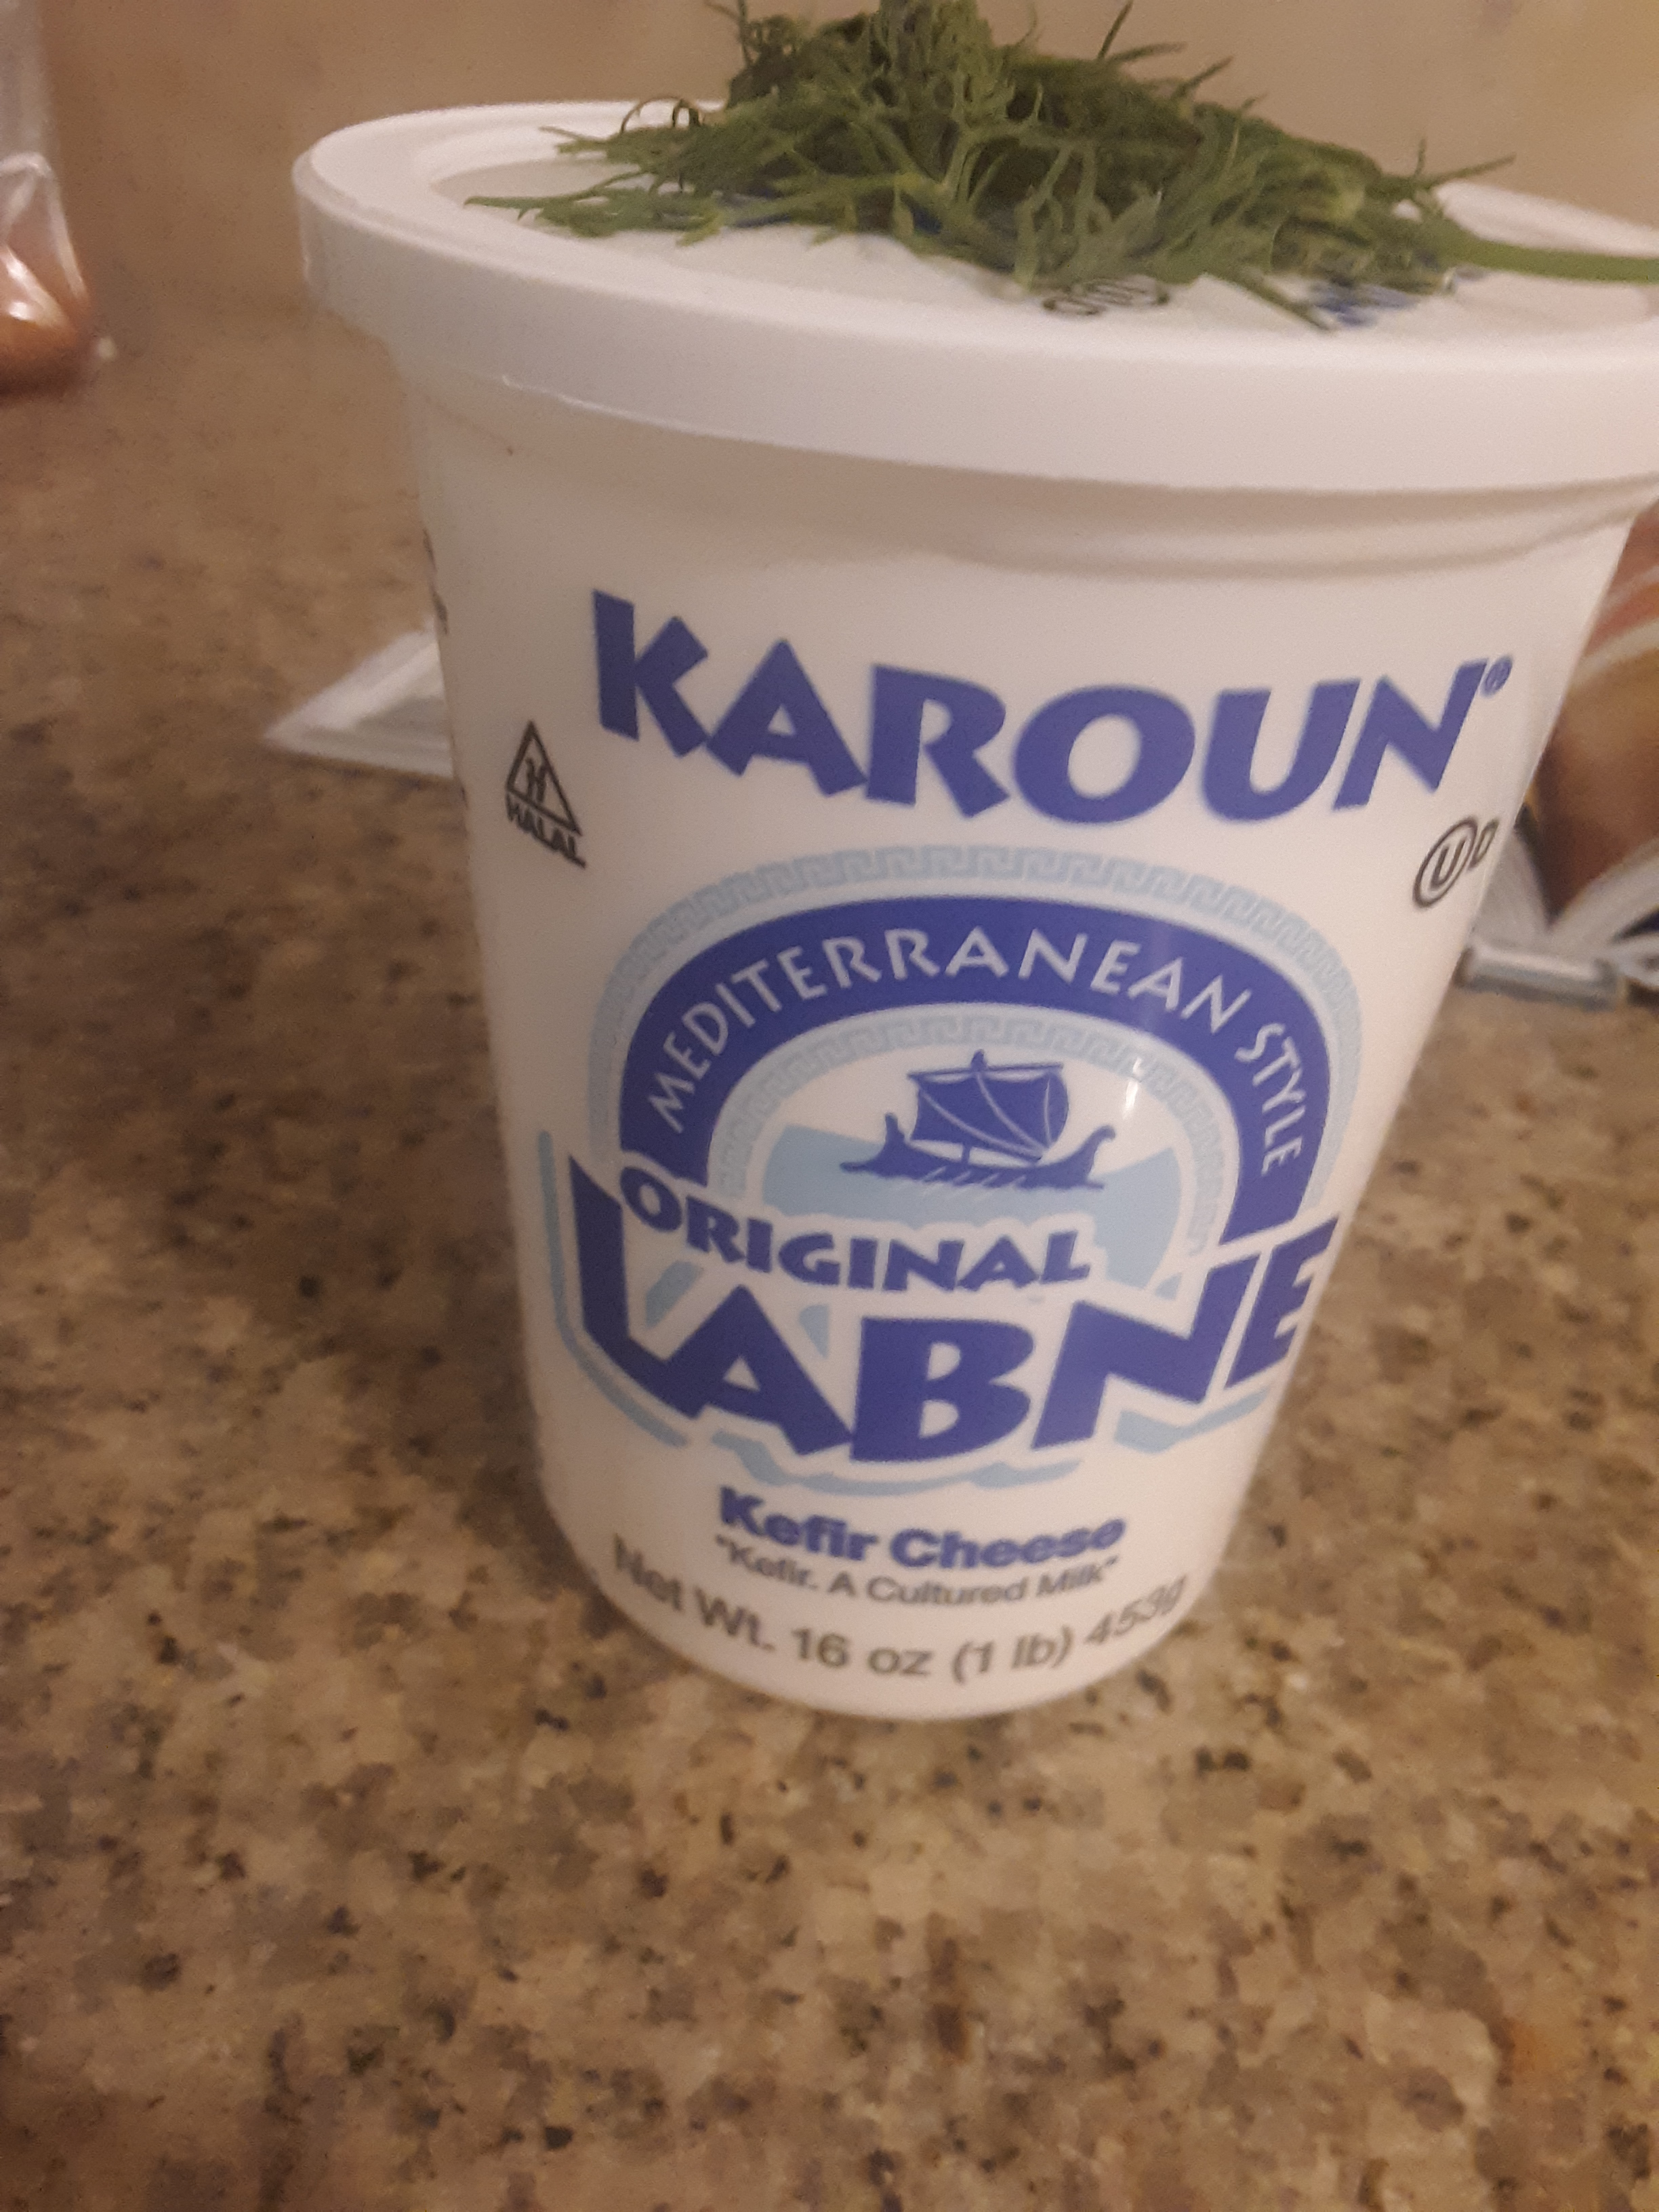 Living well in the 21st century - Limassol, Cyprus - picture of a white container with a blue label written on the container, "karoun -mediterranean style - original Lebne - kefir cheese - "kefir. A cultured milk." Net wt. 16 oz (1 ib) 453g placed on a brown kitchen counter. 